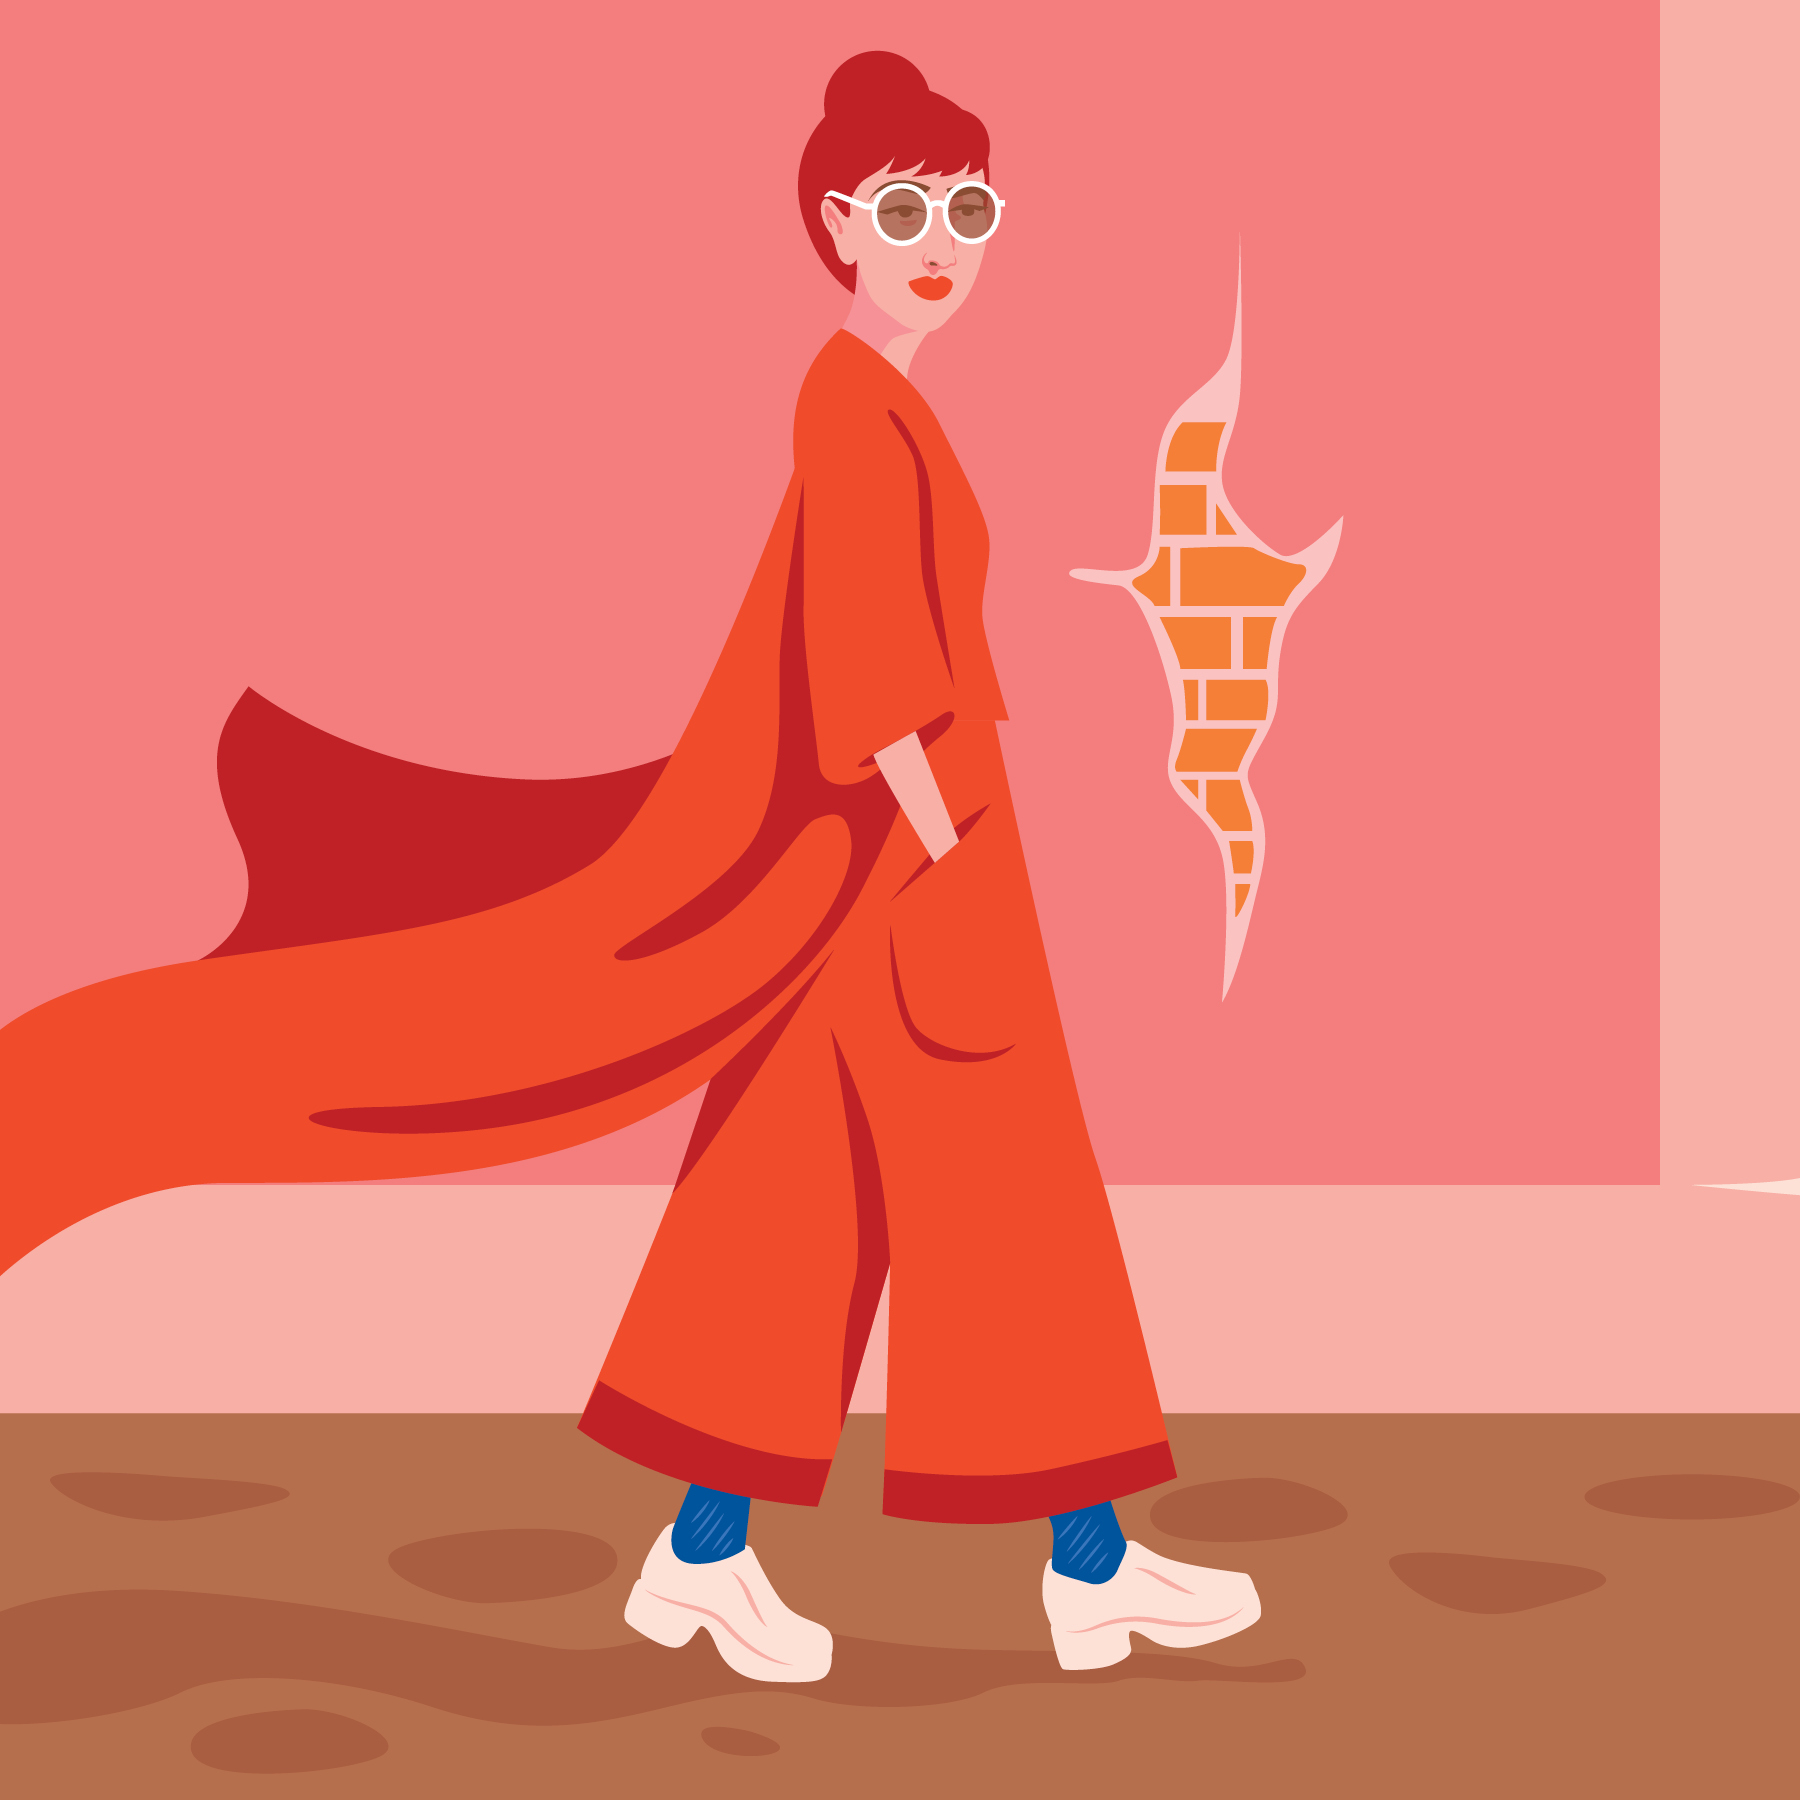 Illustration with woman in long red coat and pants